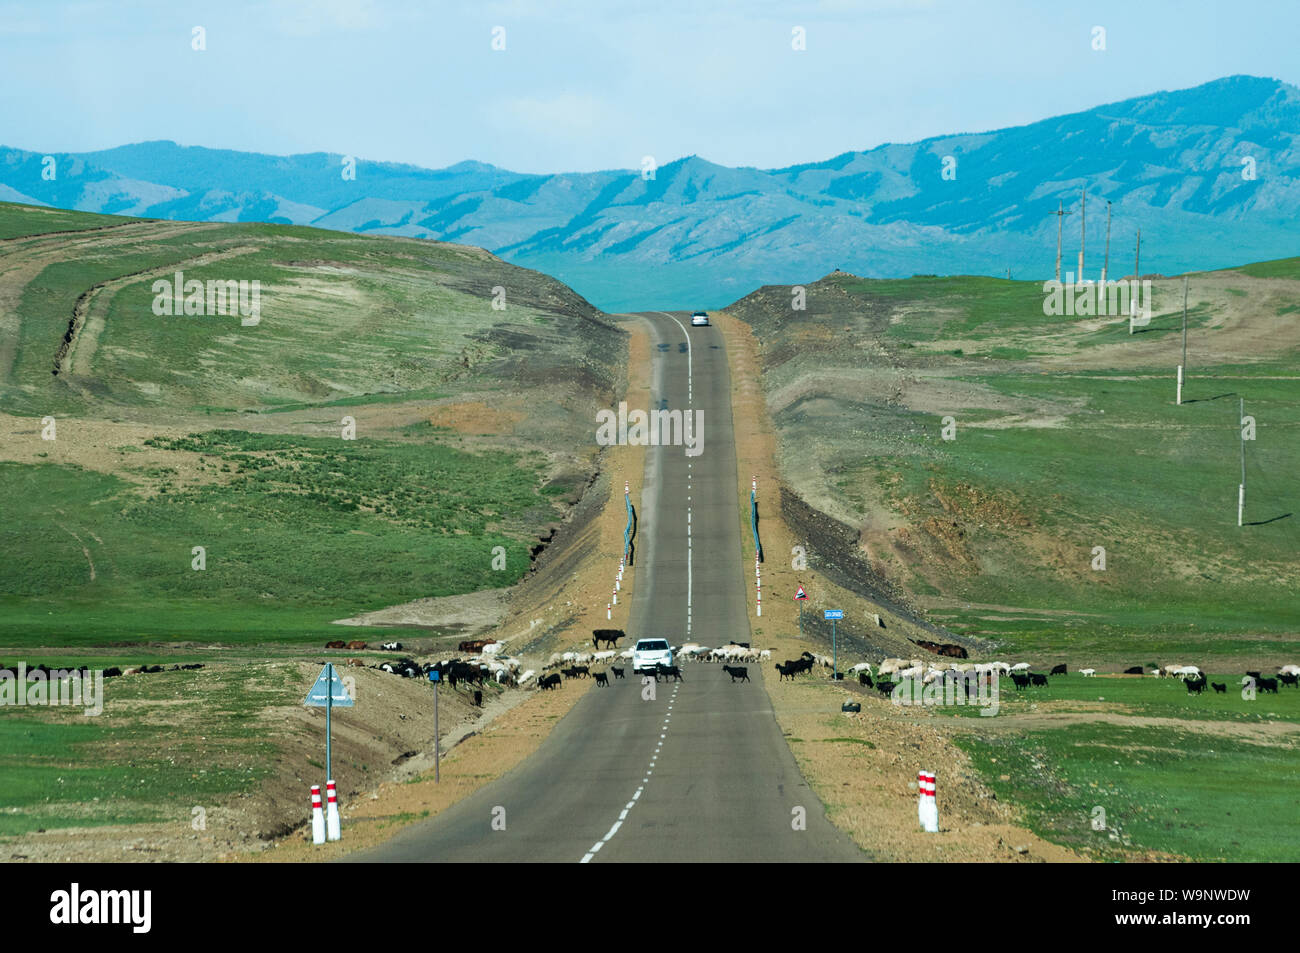 Goats crossing a highway in northern Mongolia Stock Photo